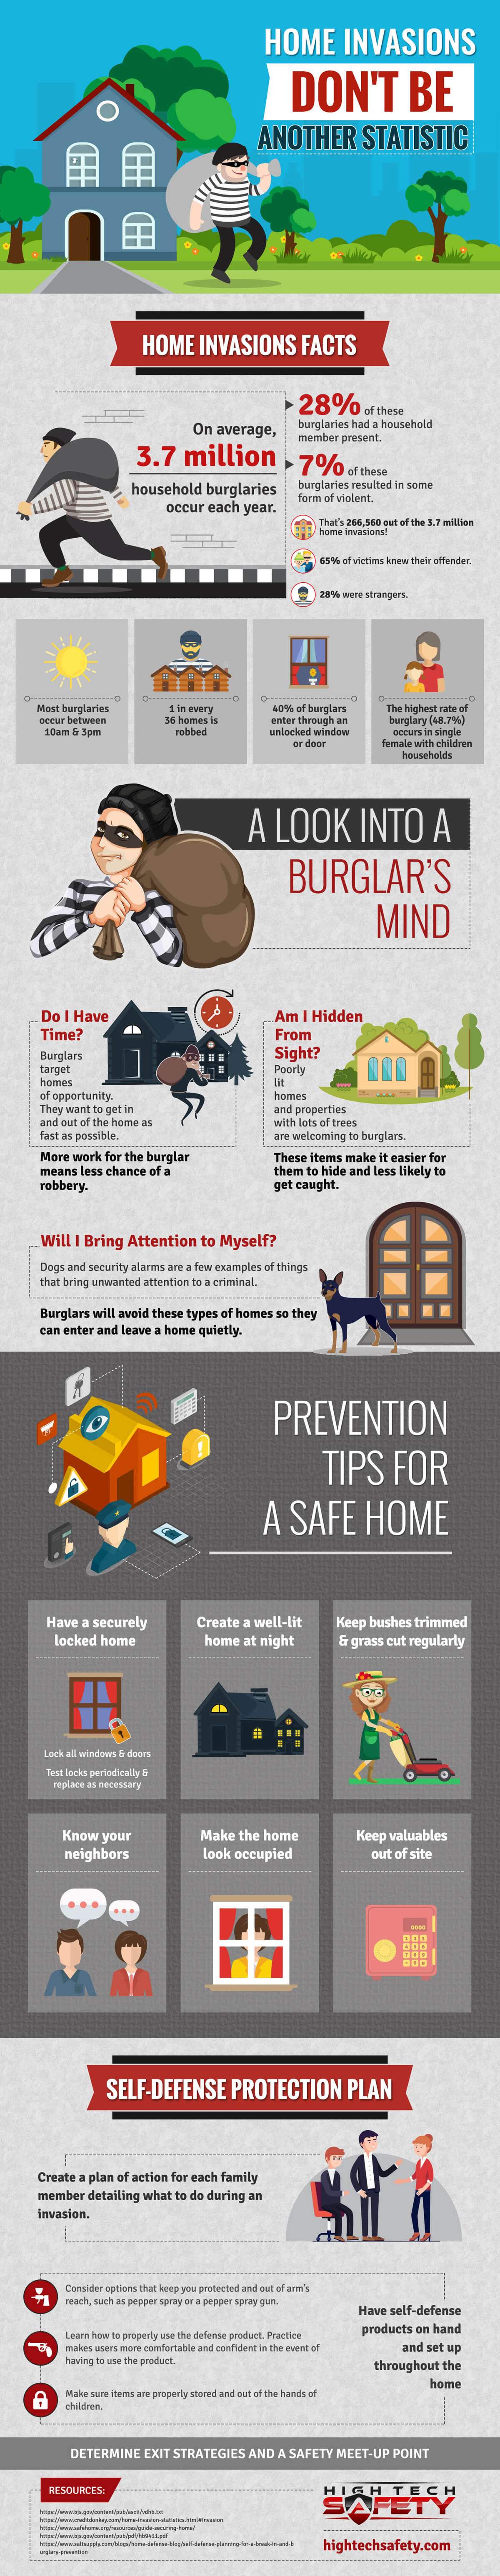 Home Invasions Don’t Be Another Statistic #Infographic